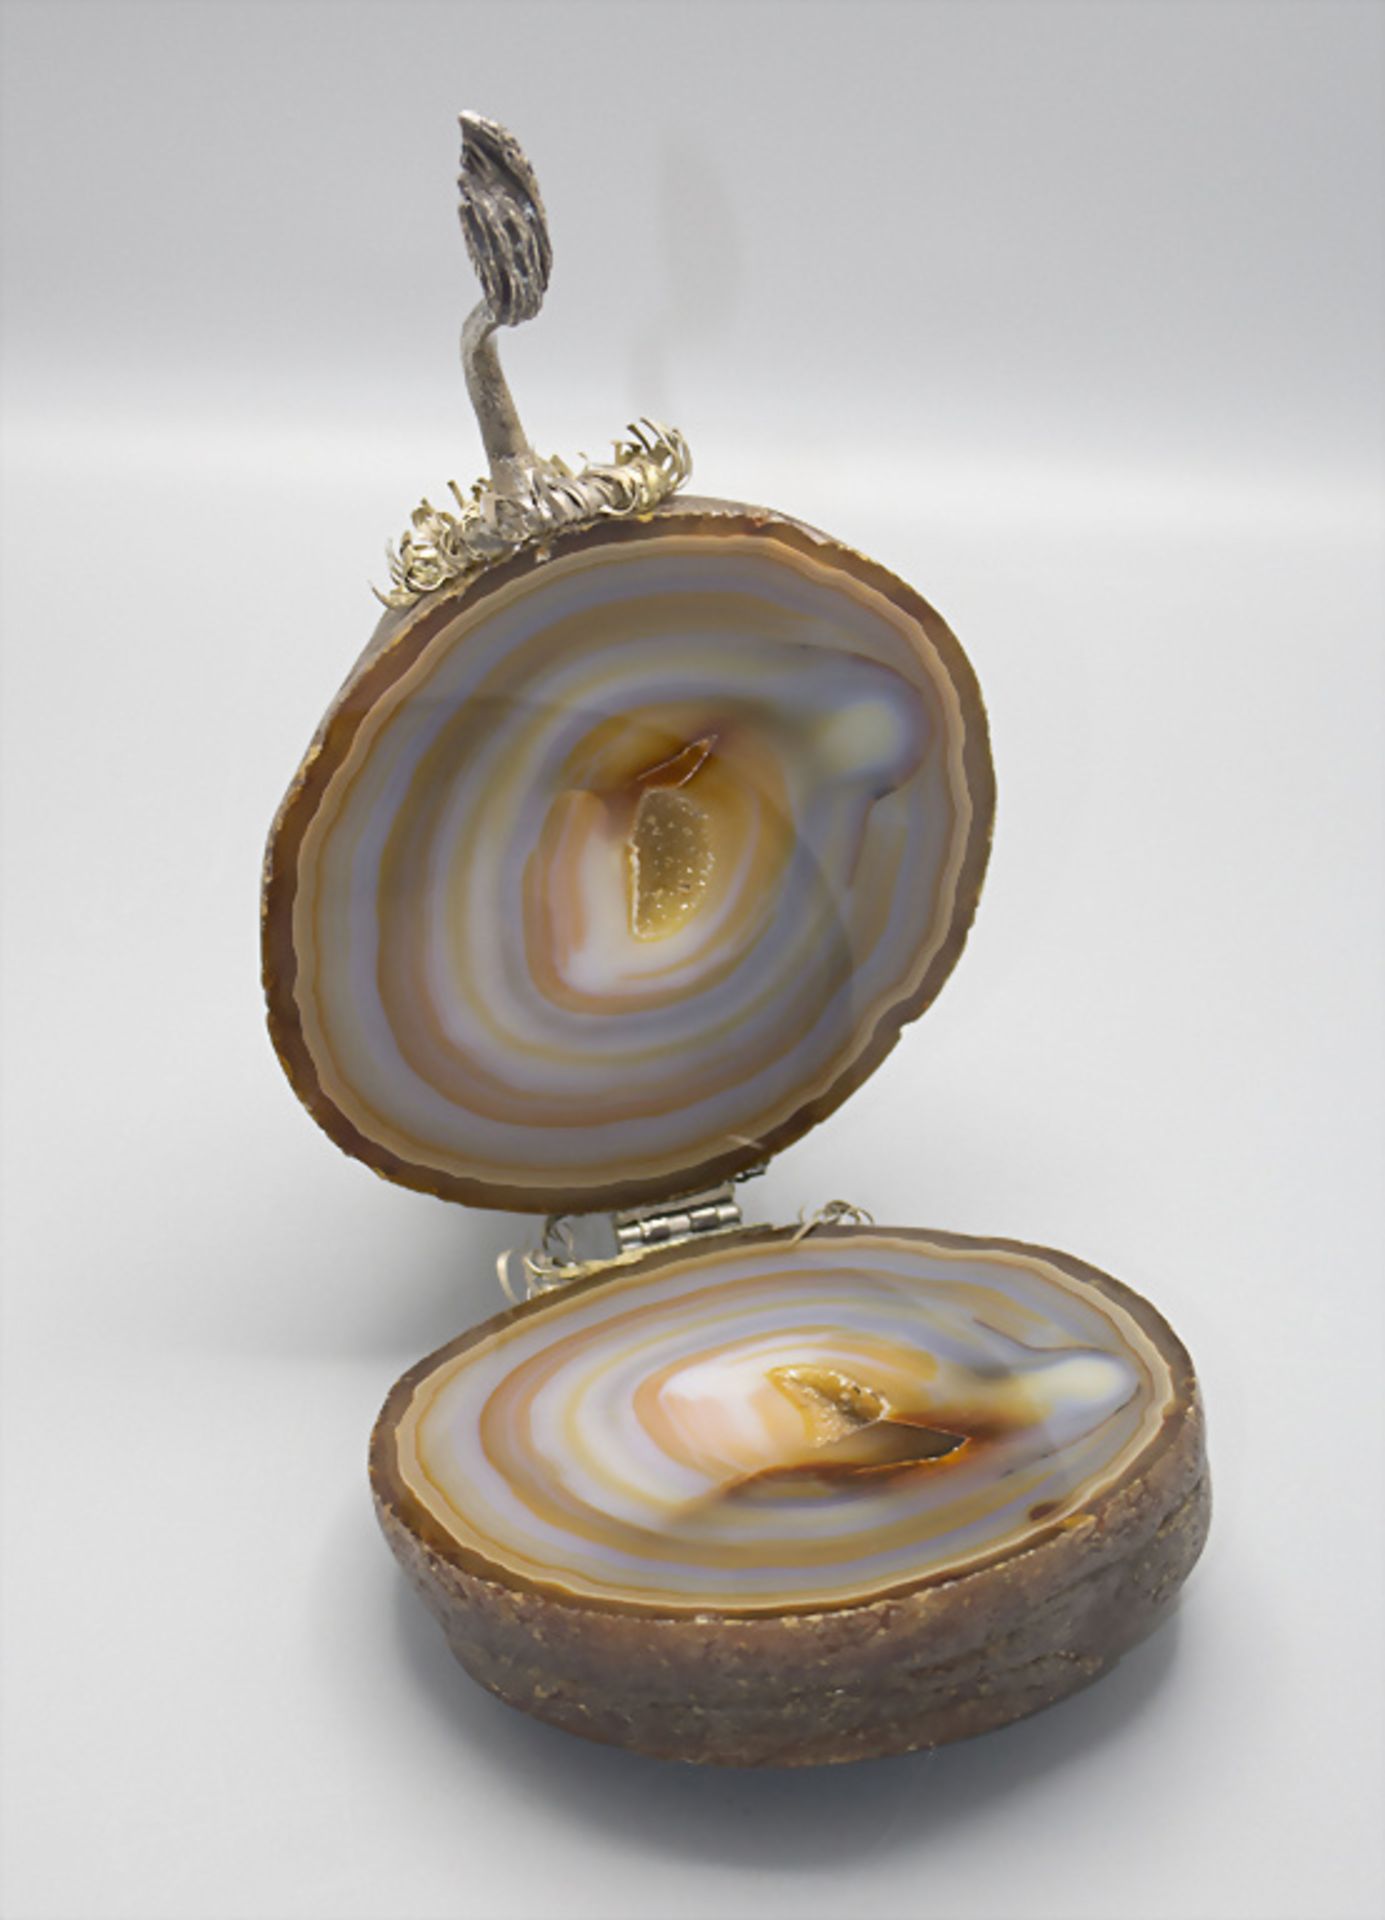 Achat- und Silberskluptur 'Stier' / An agate and silver sculpture of a bull, wohl Gabriele De ... - Image 3 of 6